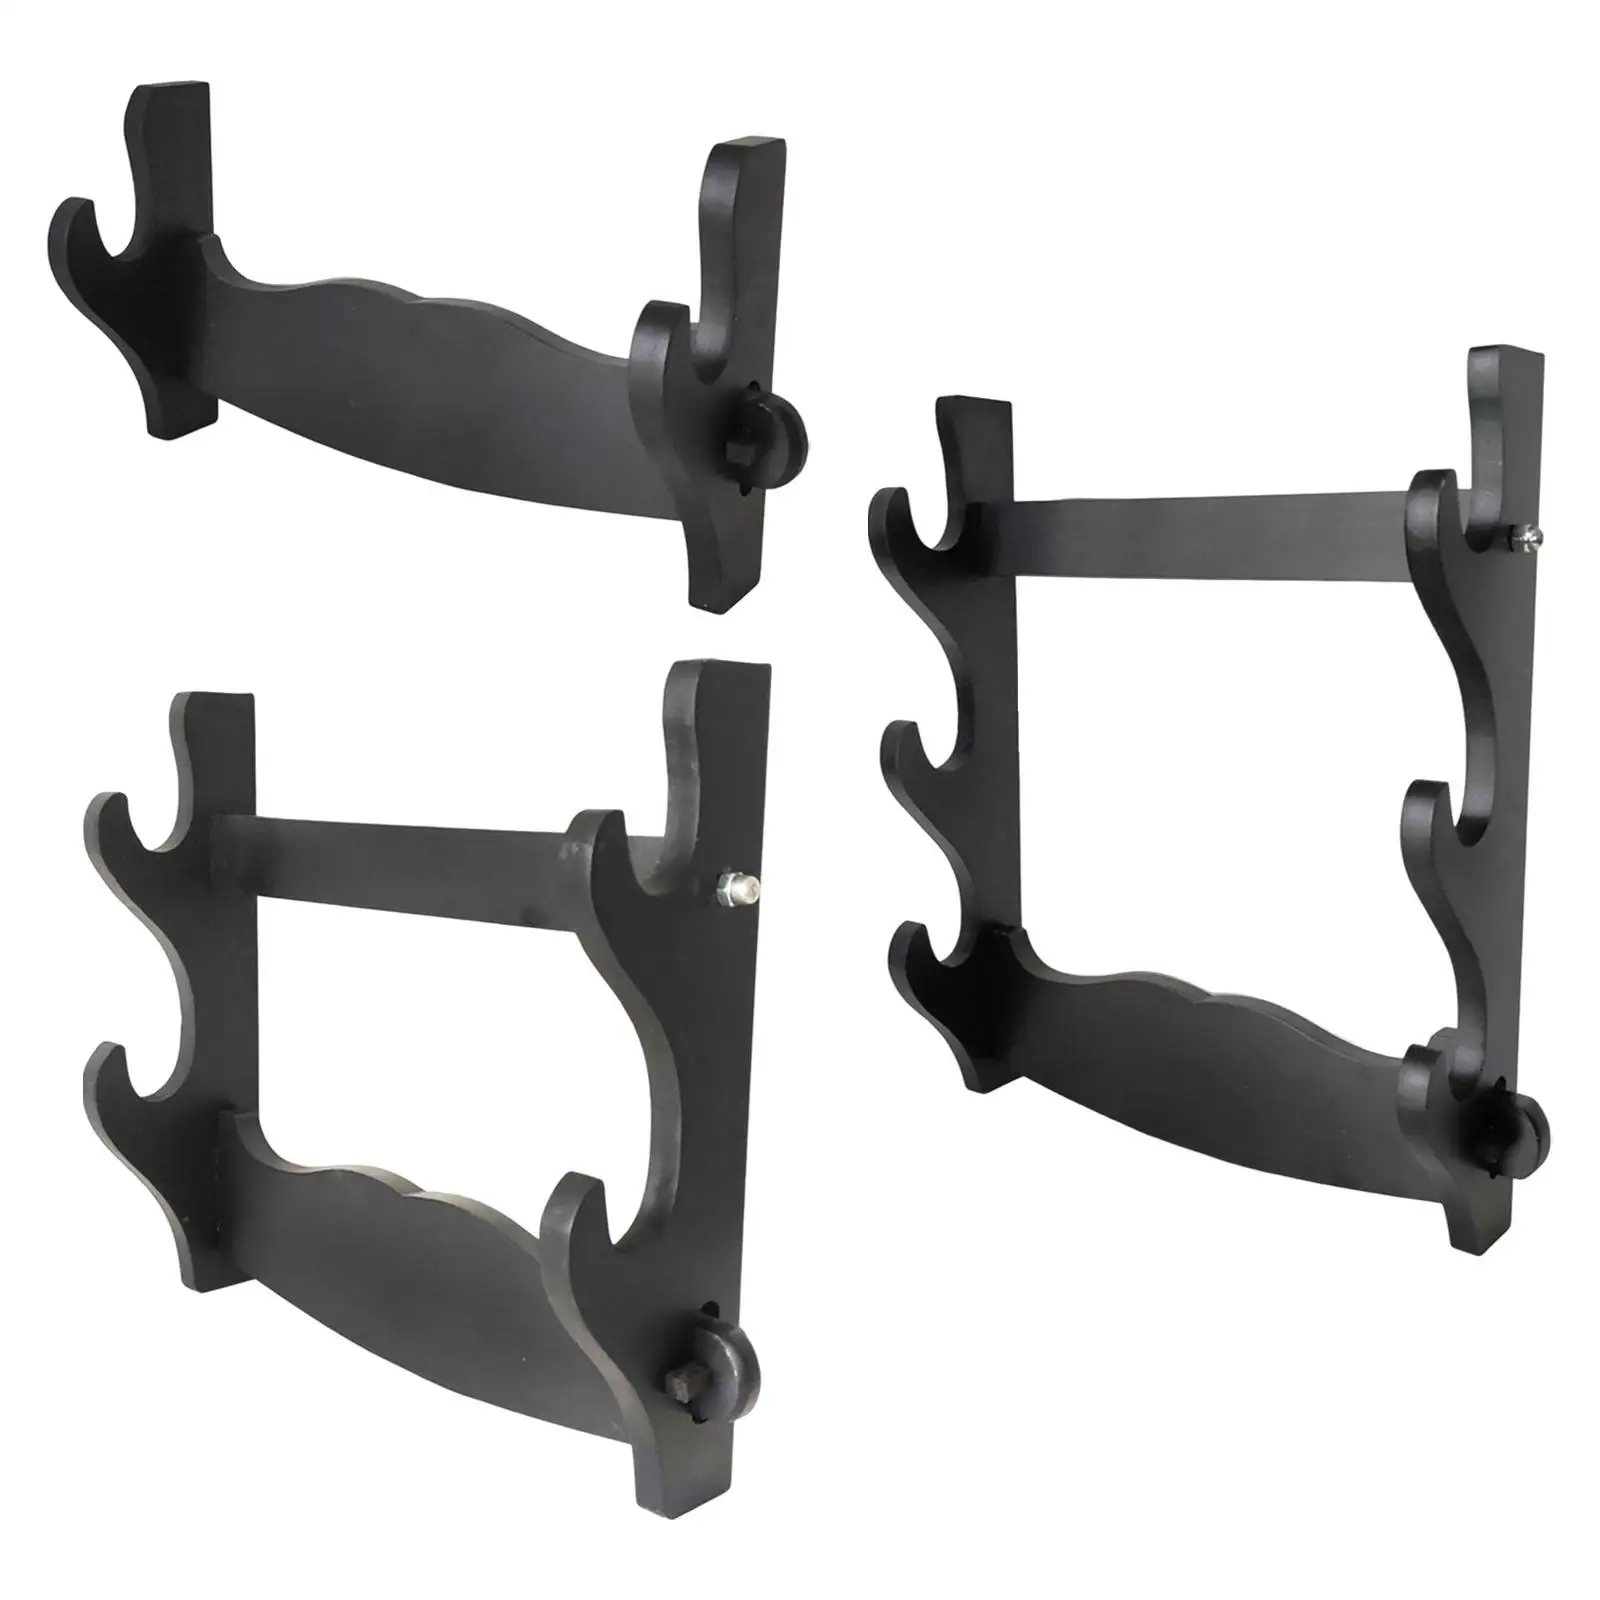 Density Board Lightsaber Rack, Wall Mount Support  Display Stand